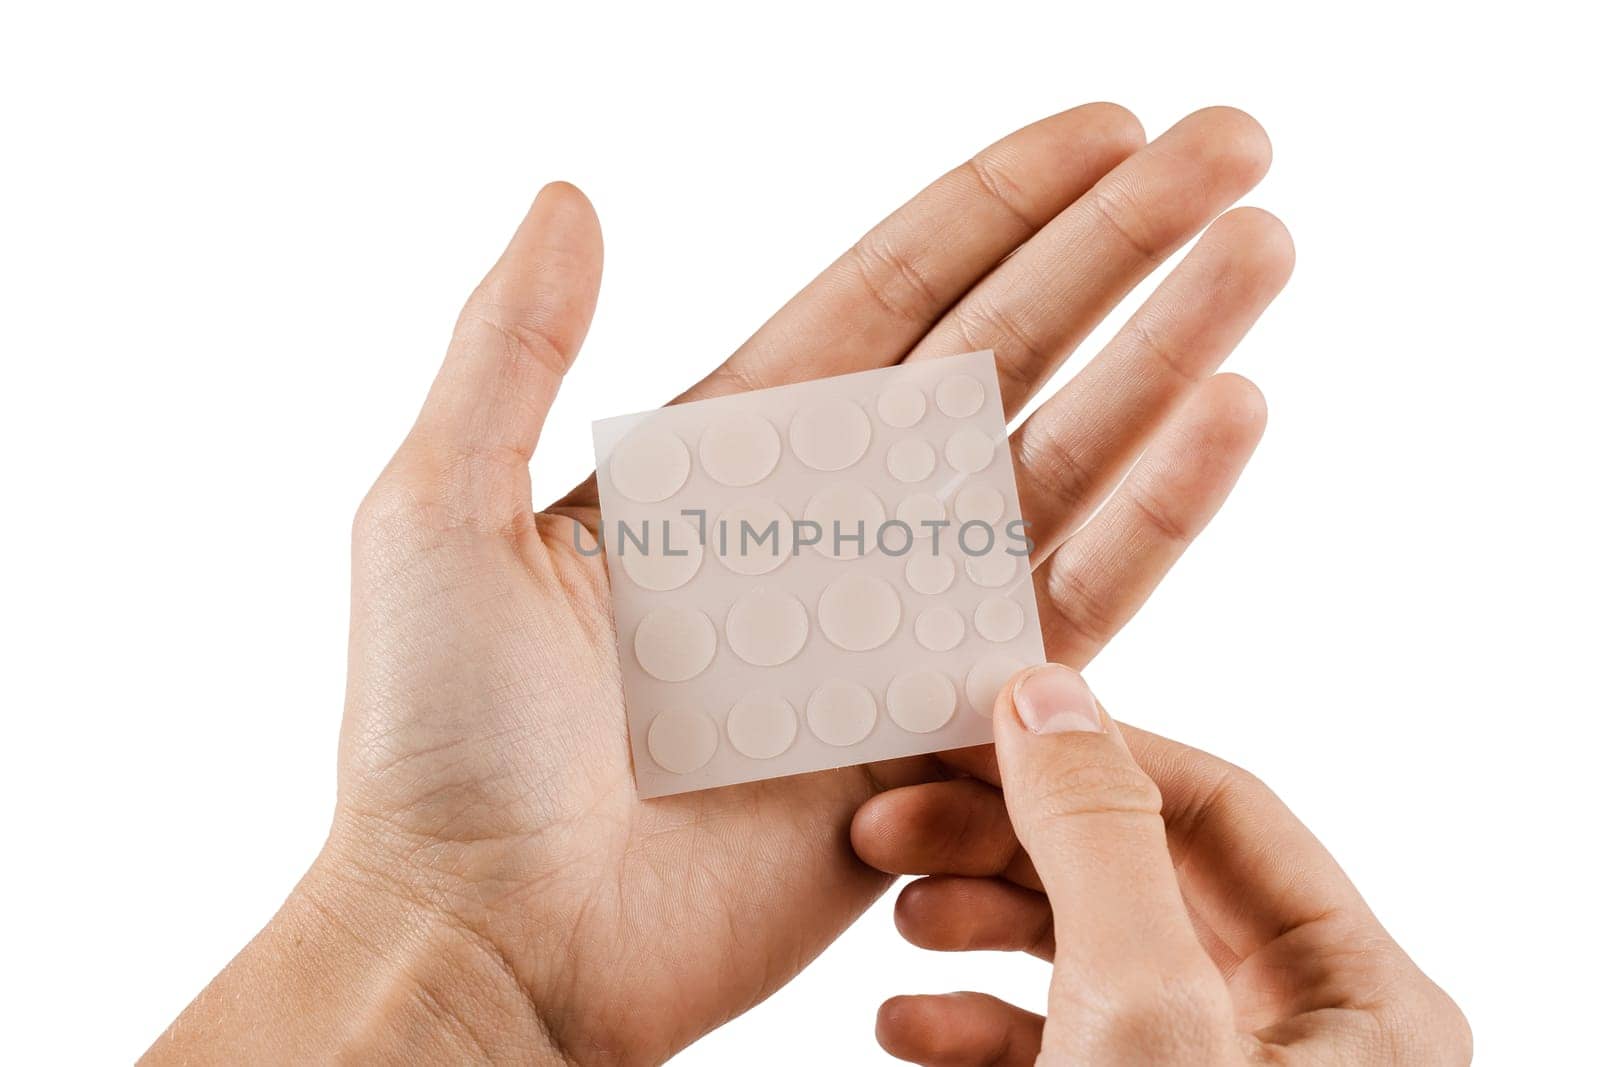 Set of round patches for acne in hands on white background. Acne patches for treatment of pimple and rosacea close-up. Facial rejuvenation cleansing cosmetology. by Rabizo